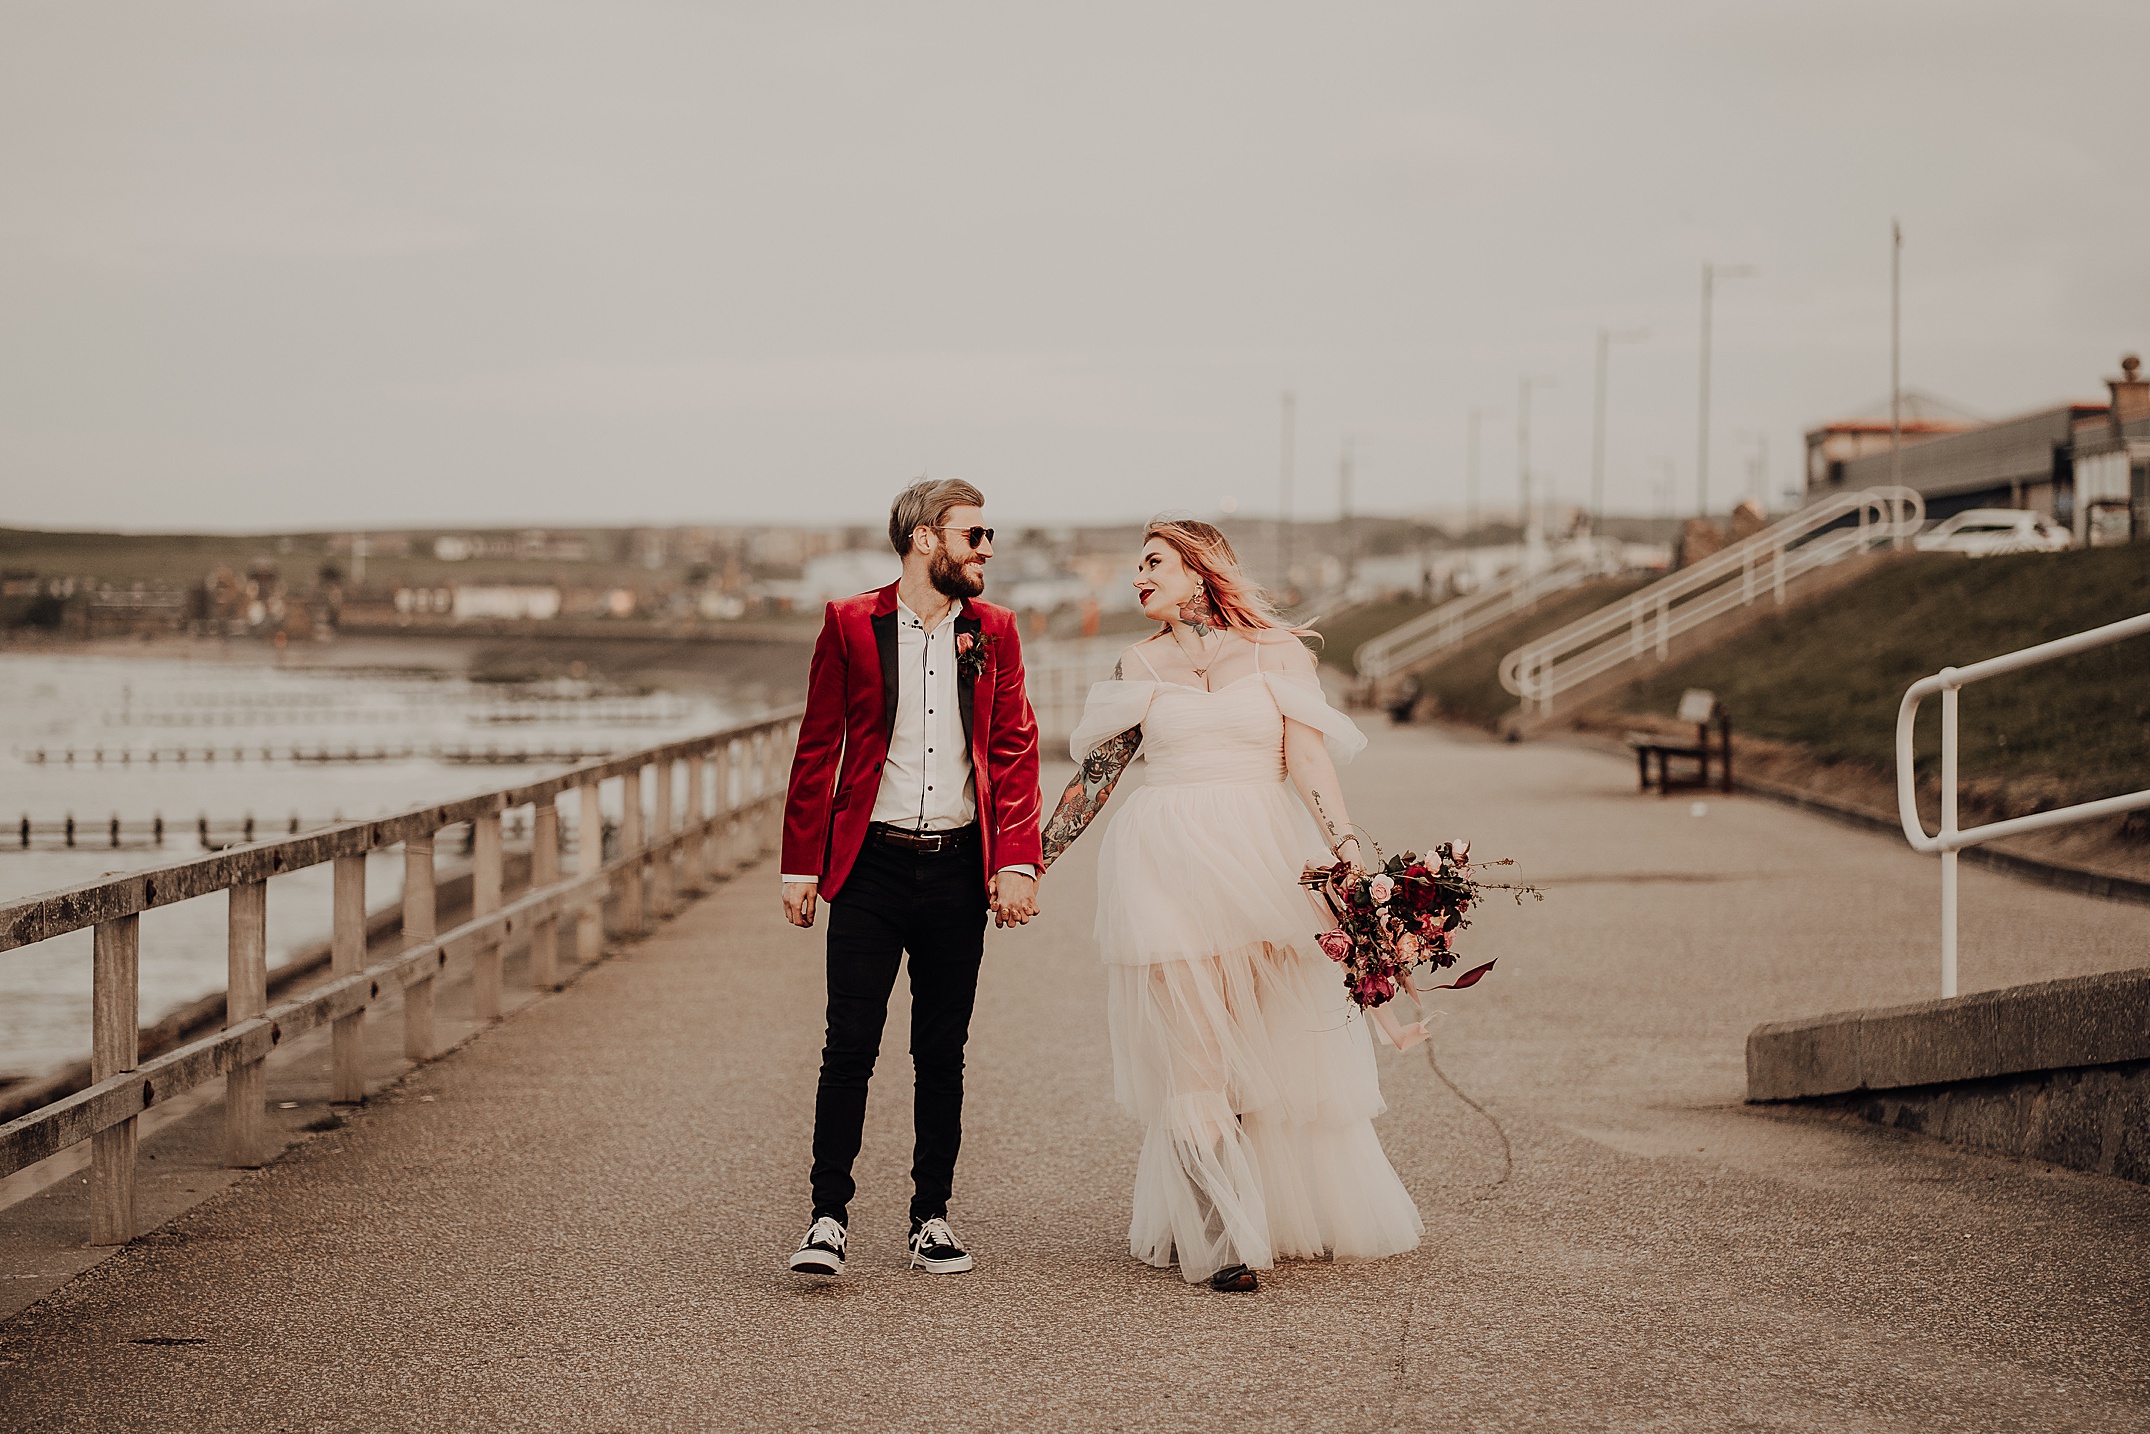 she is wearing white dress and holding bouquet he is wearing red velvet jackets as they hold hands walking down aberdeen promenade scotland engagement photos